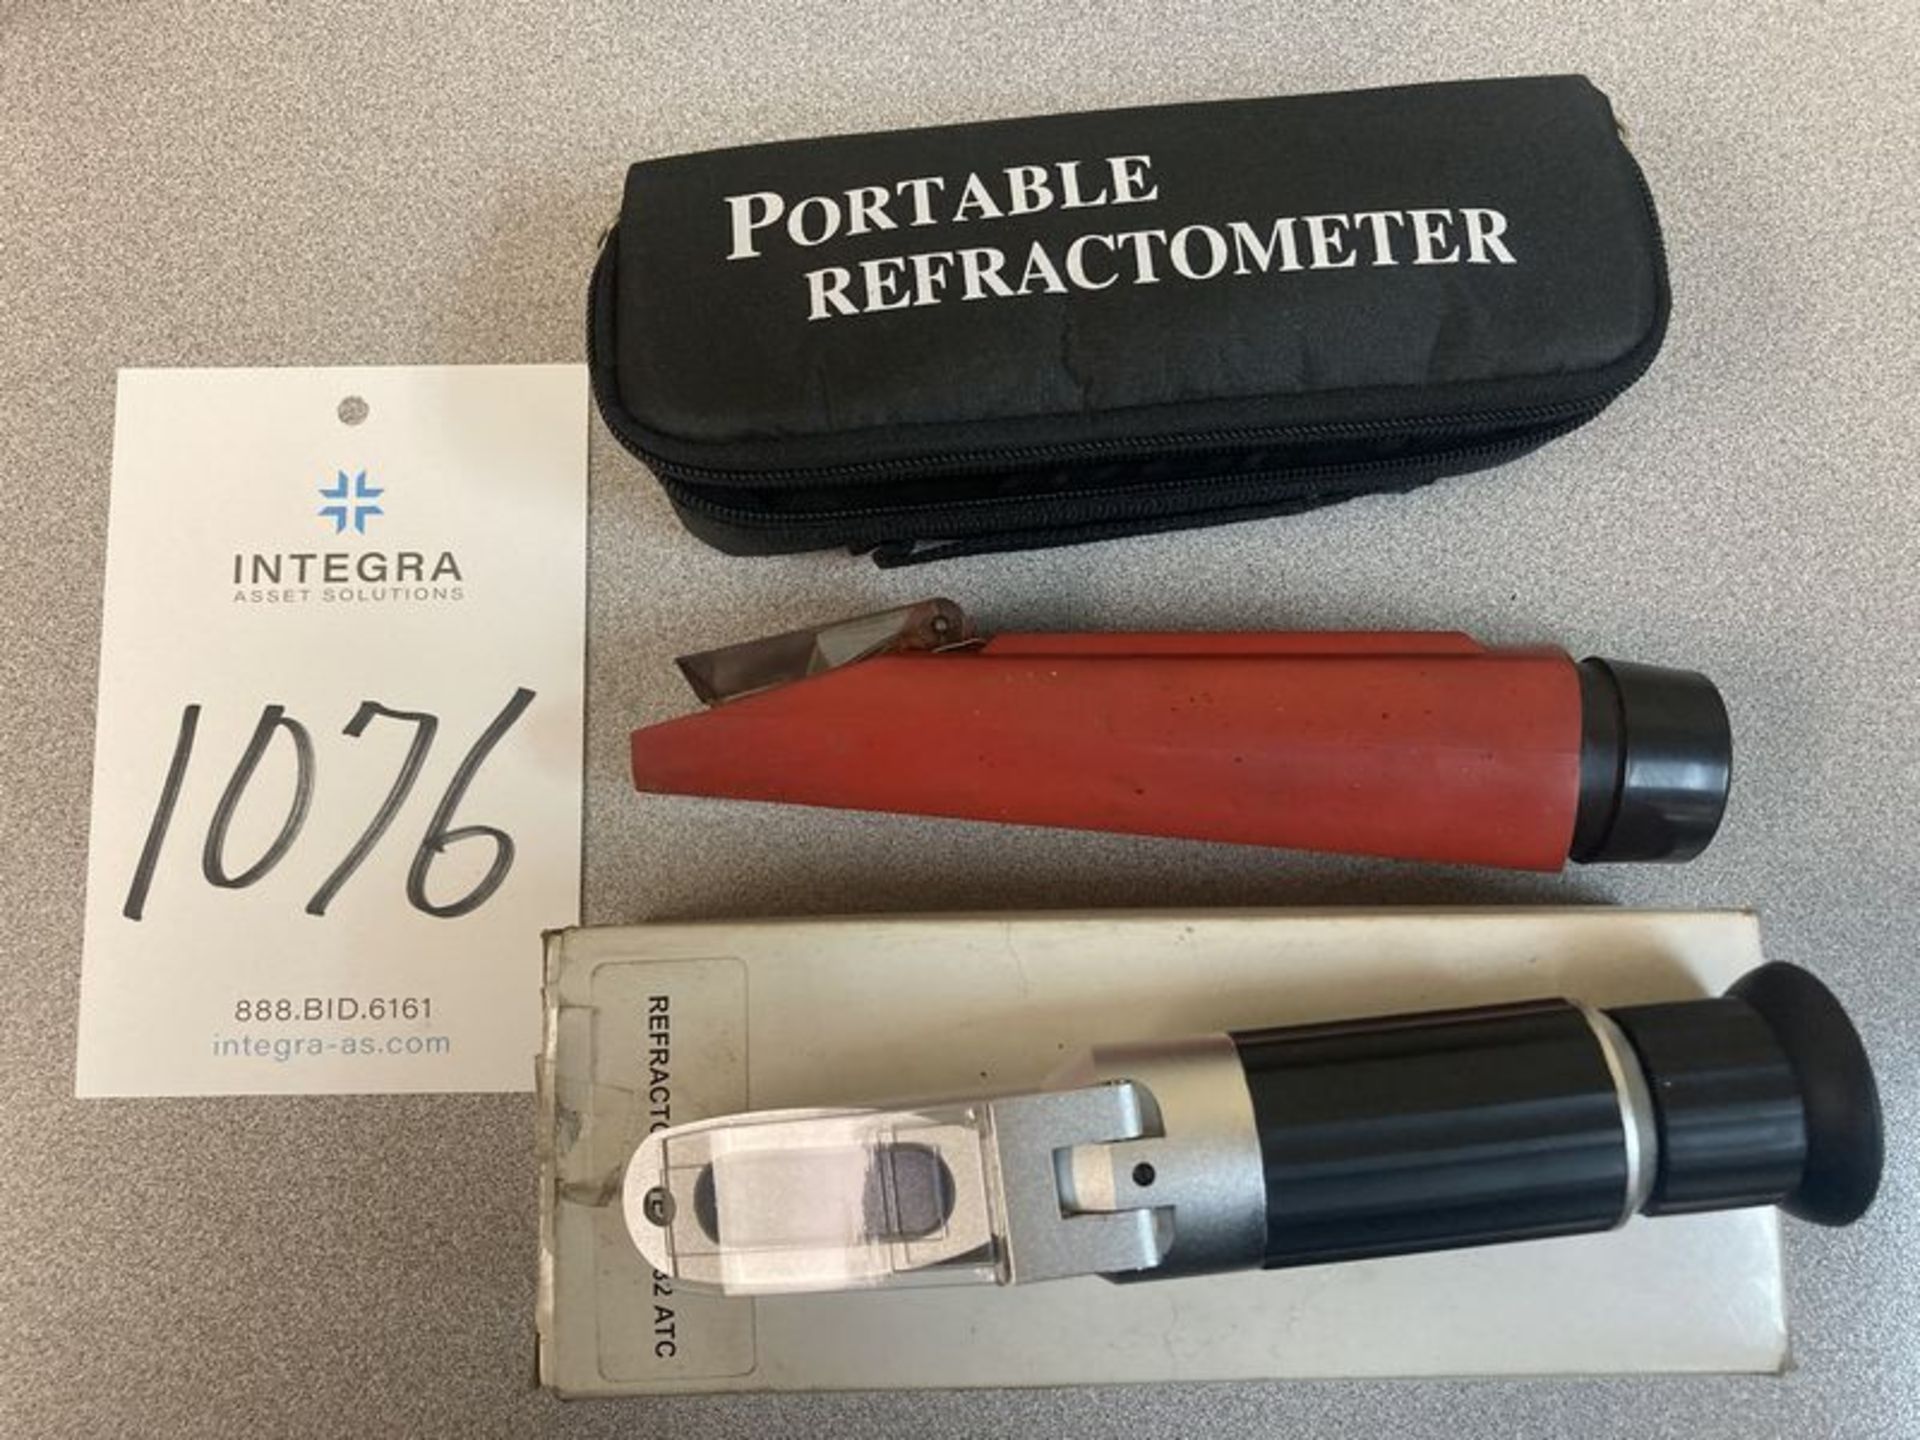 (2) Portable Refractometers